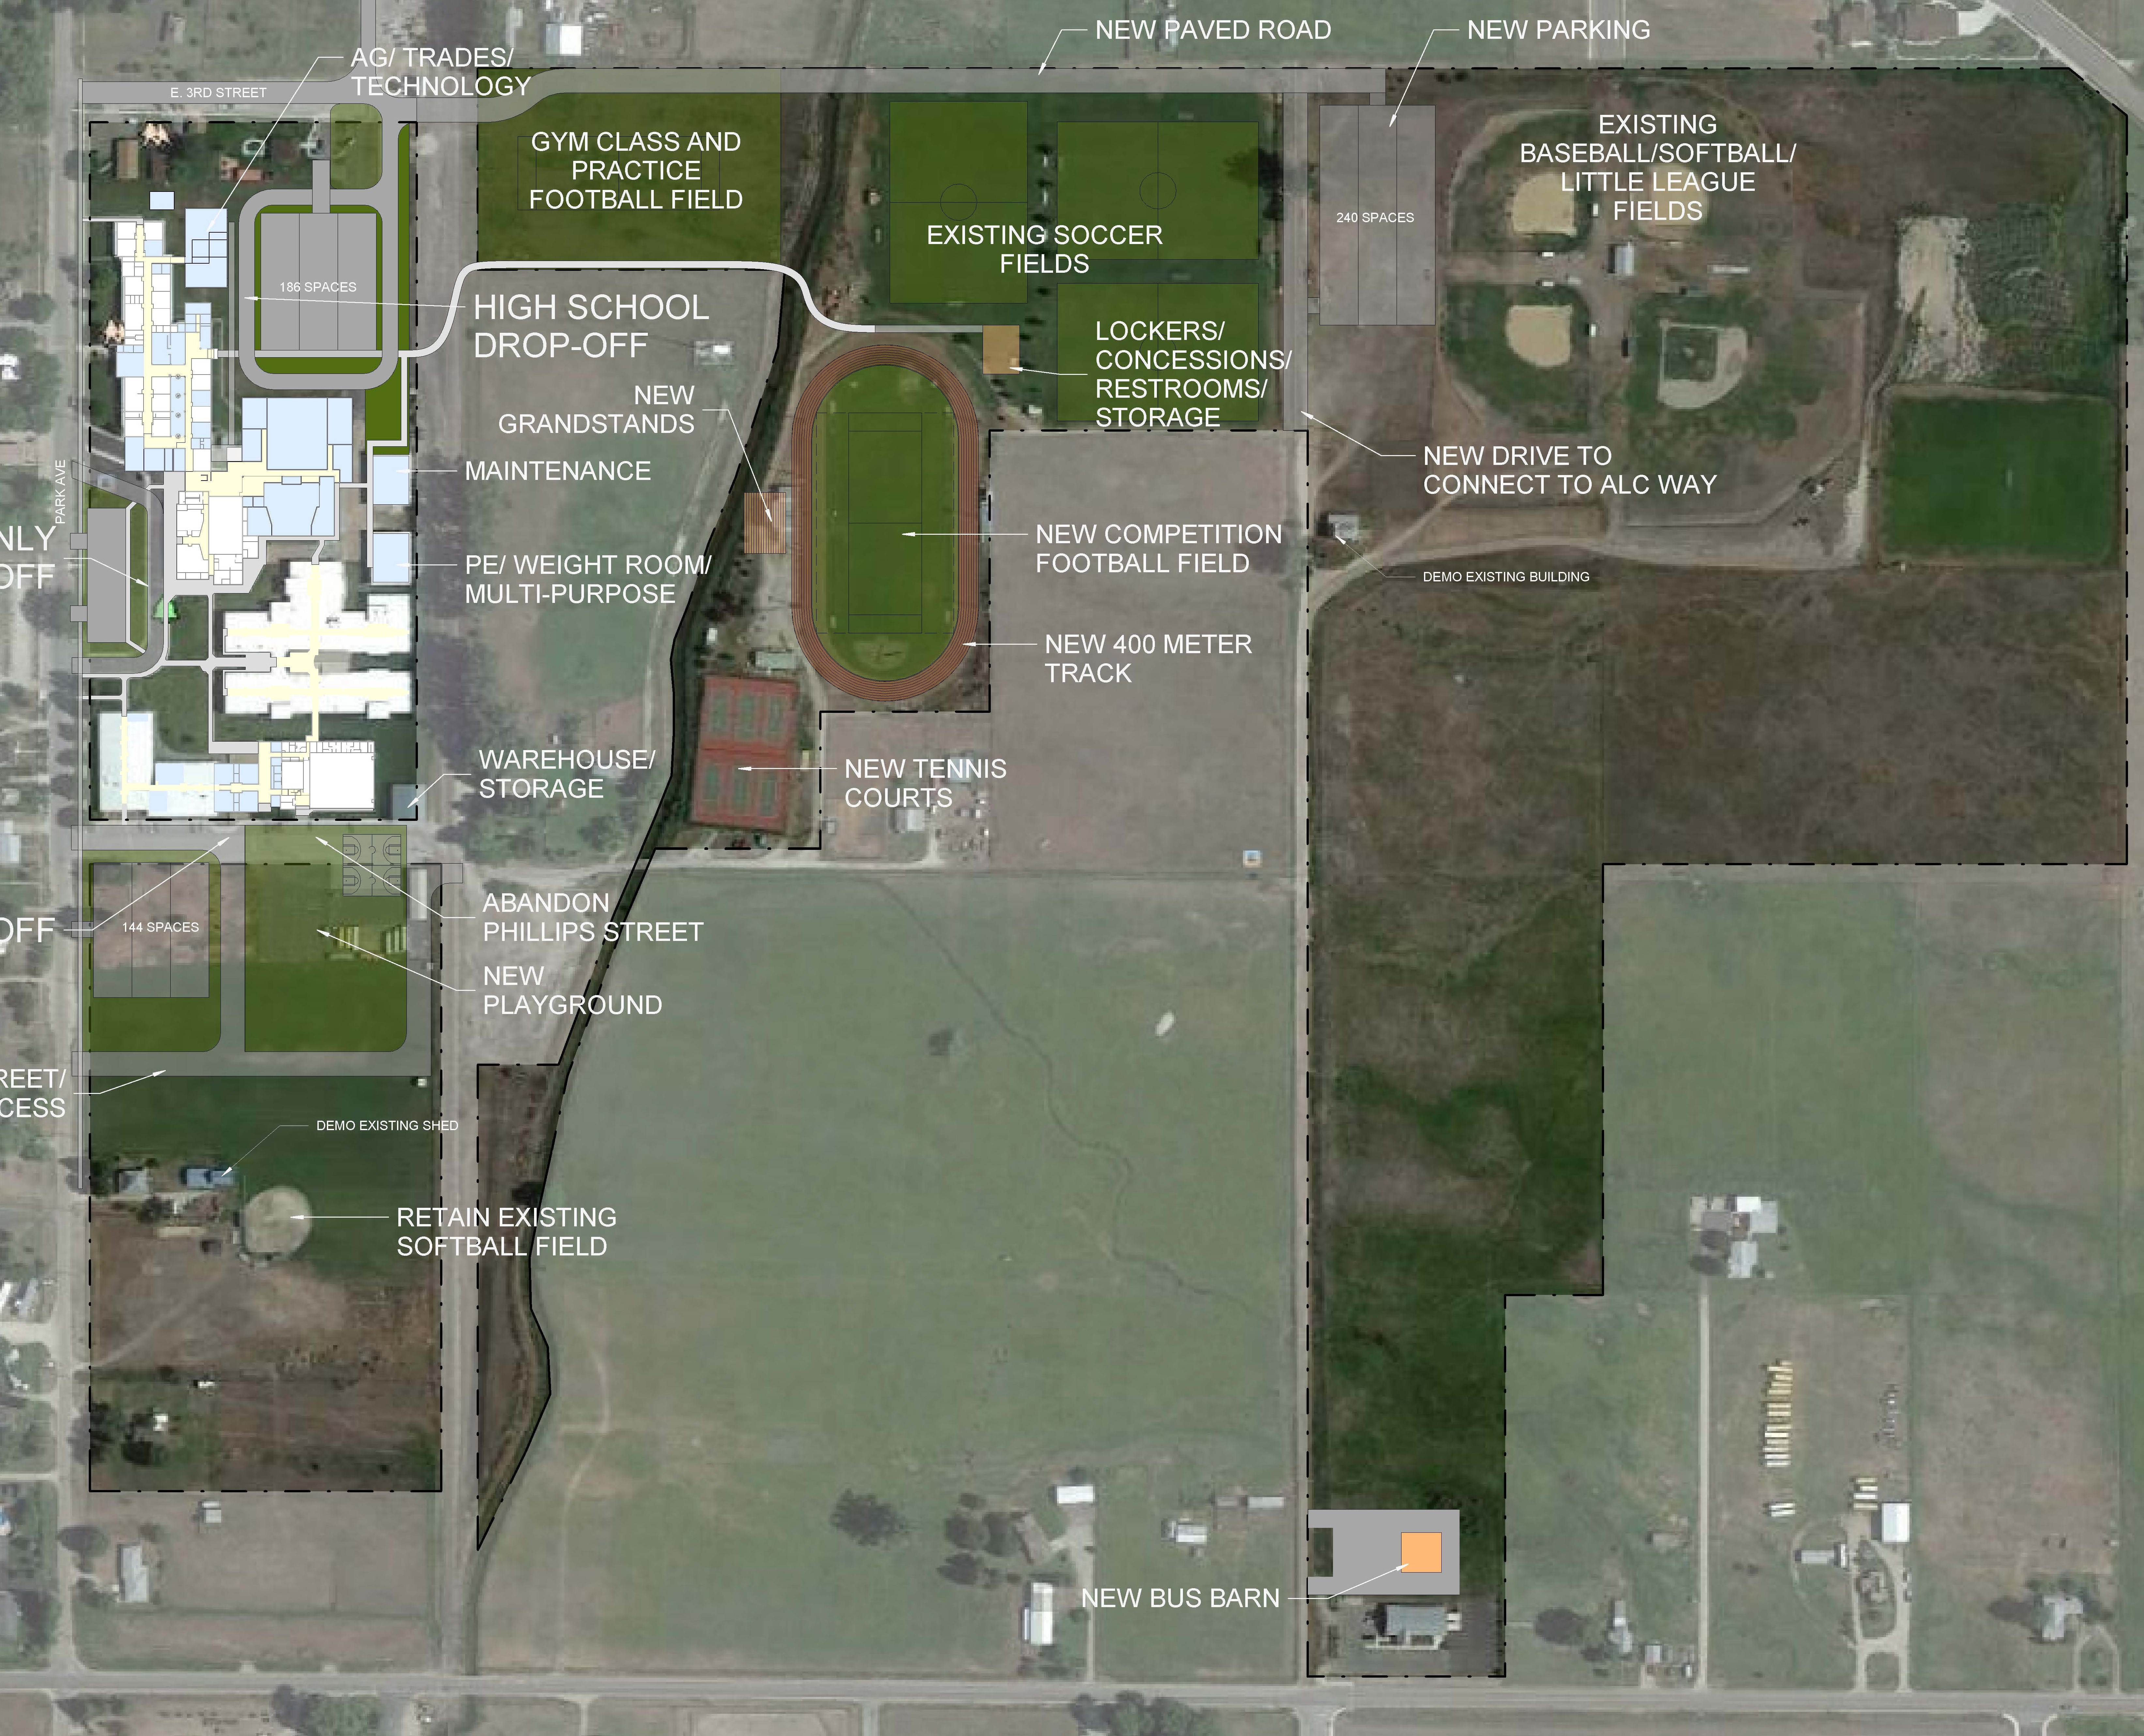 An image of the 20 year master/site plan for all potential School Bond projects being considered. For a description of all items please call 406-777-5481 ext 136